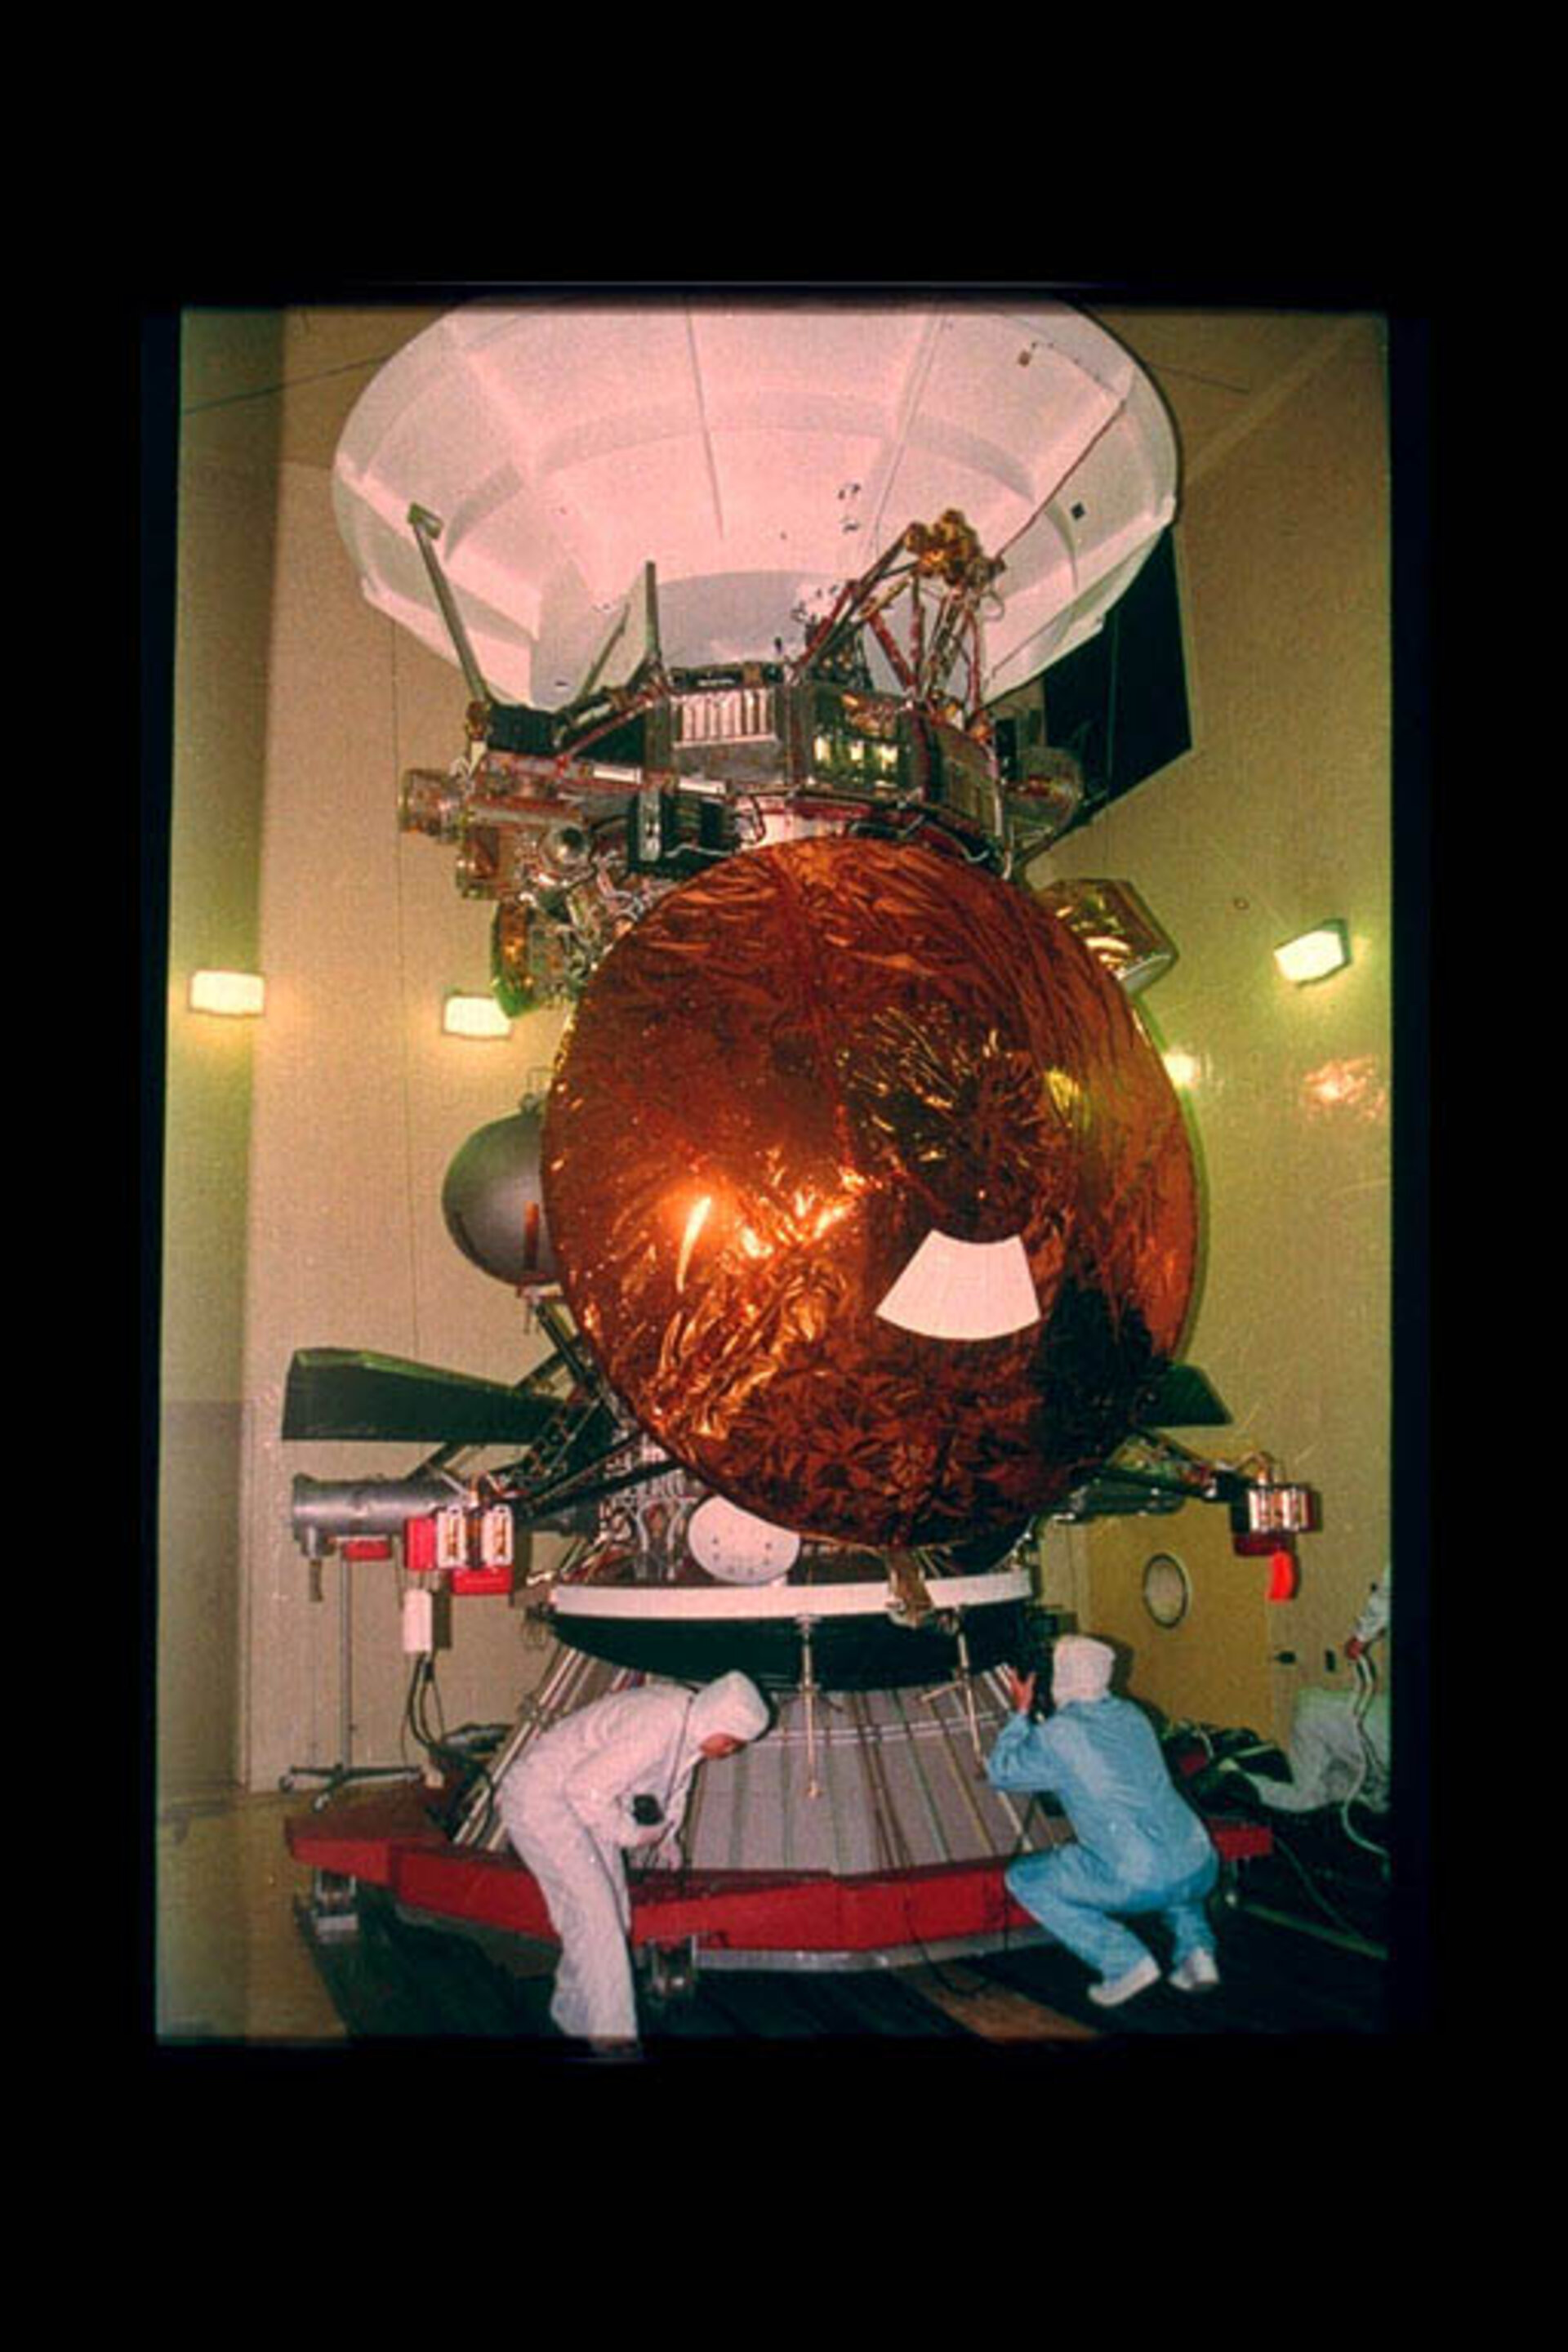 The Huygens Probe in its final launch configuration